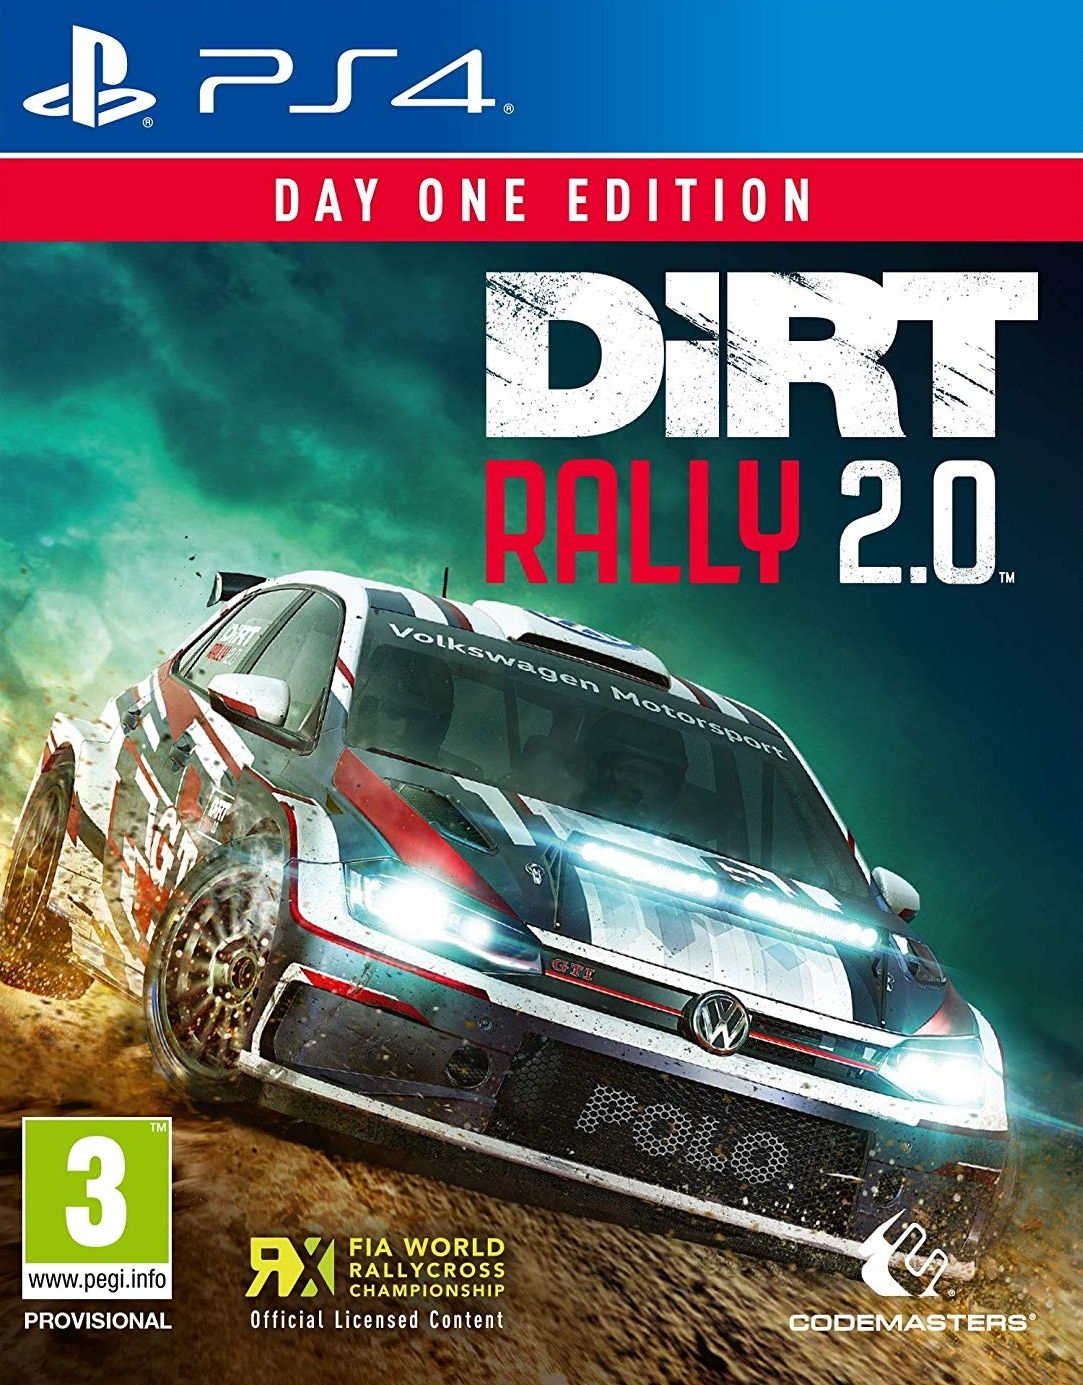 PS4 Dirt Rally 2.0 Day One Edition